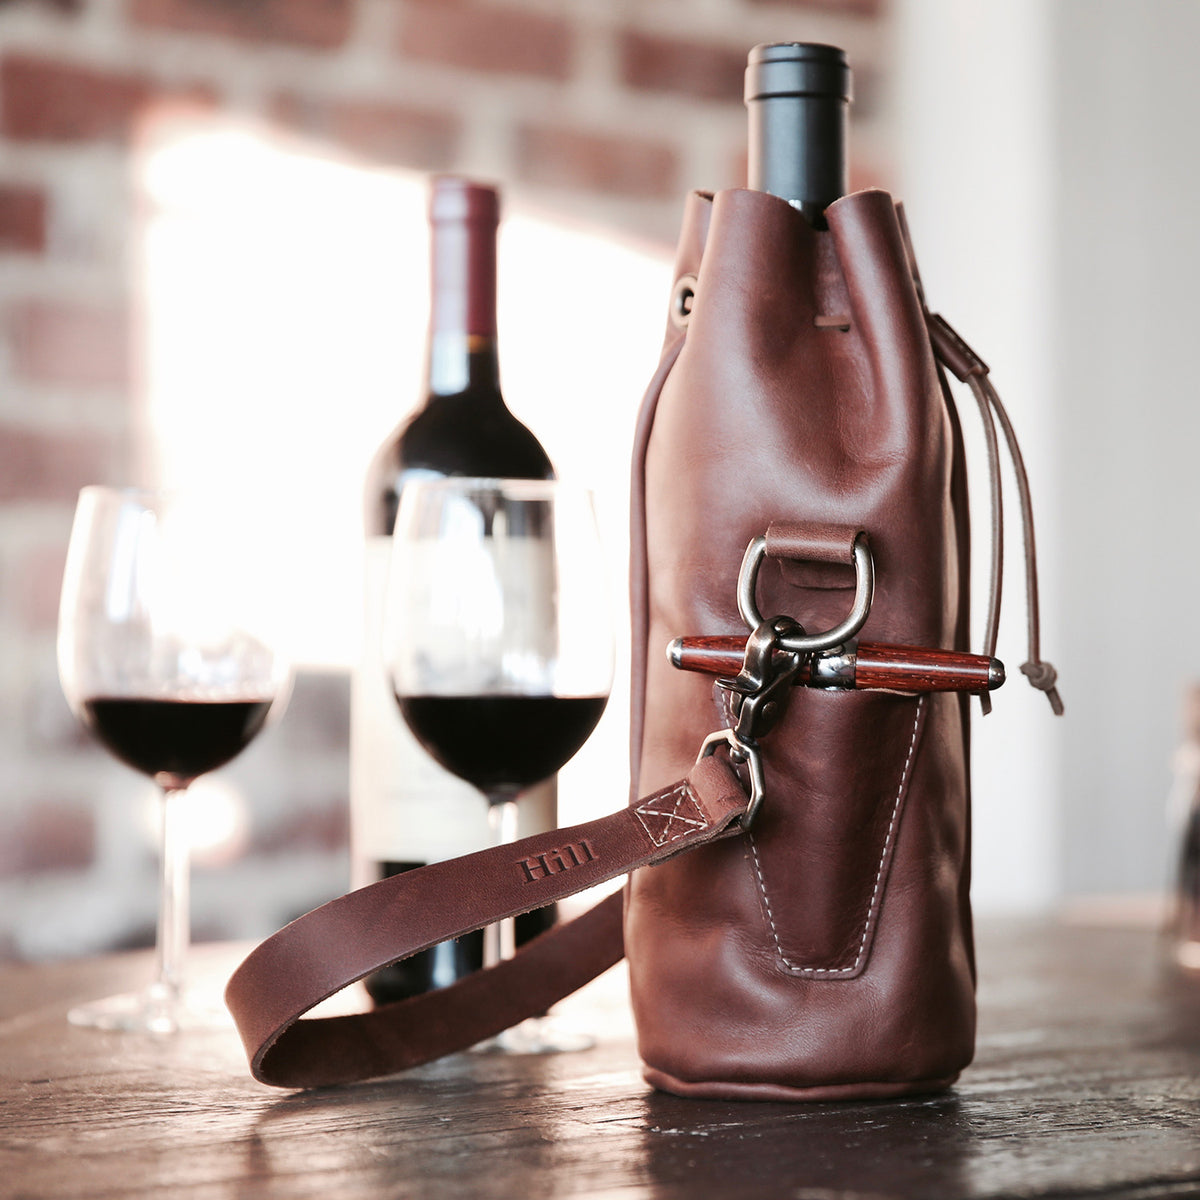 The Muscadine Personalized Fine Leather Wine Tote Wine Bottle Carrier Bag